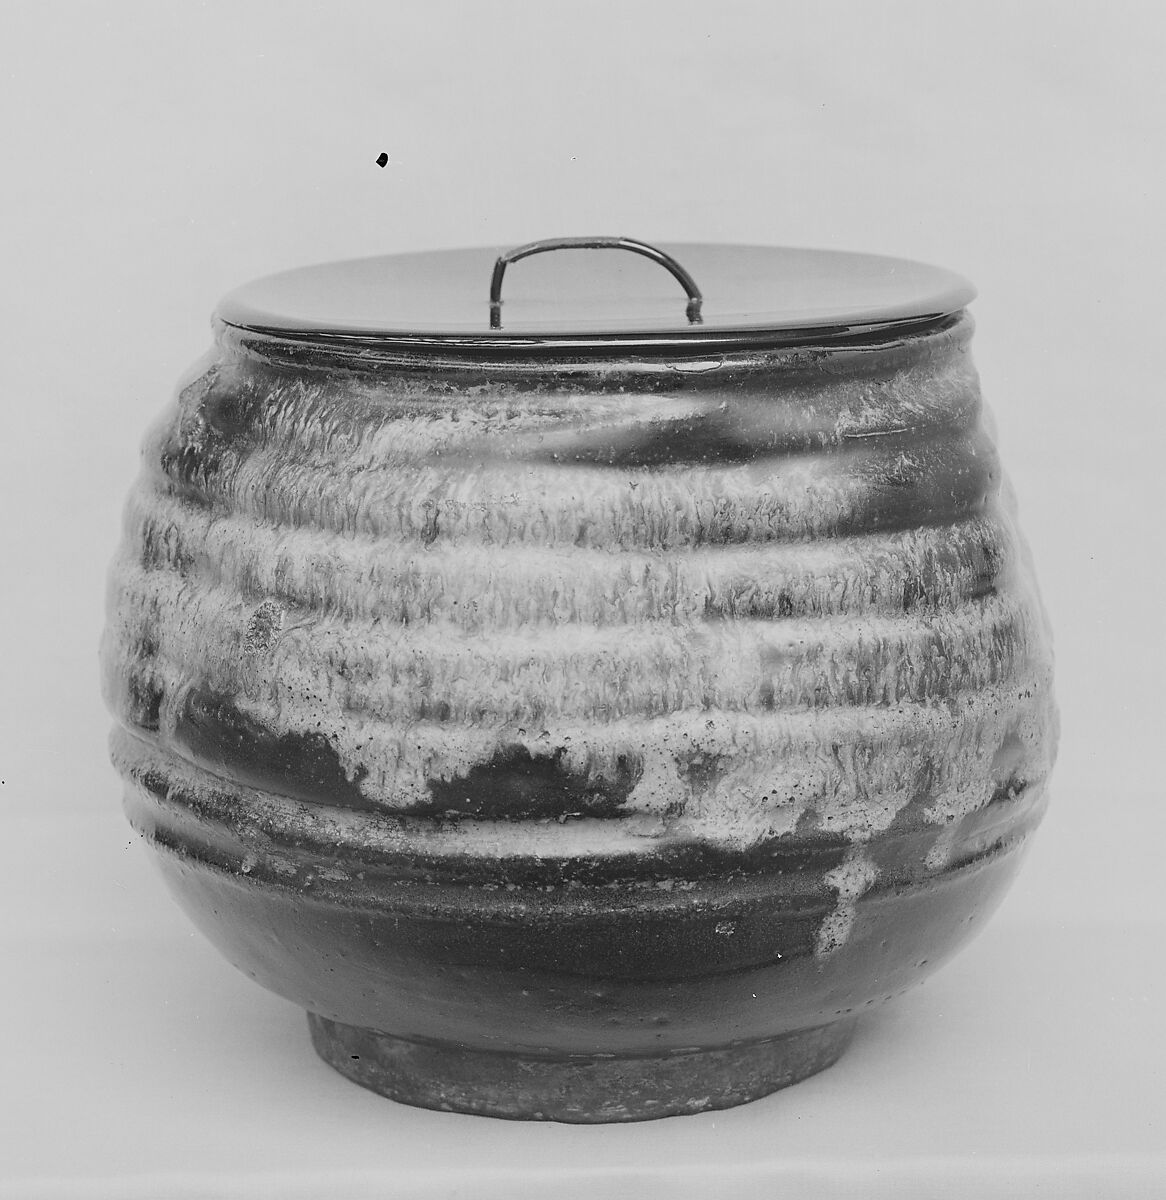 Water Pot, Clay covered with a black glaze and a white frothy overglaze; lacquer cover (Karatsu ware), Japan 